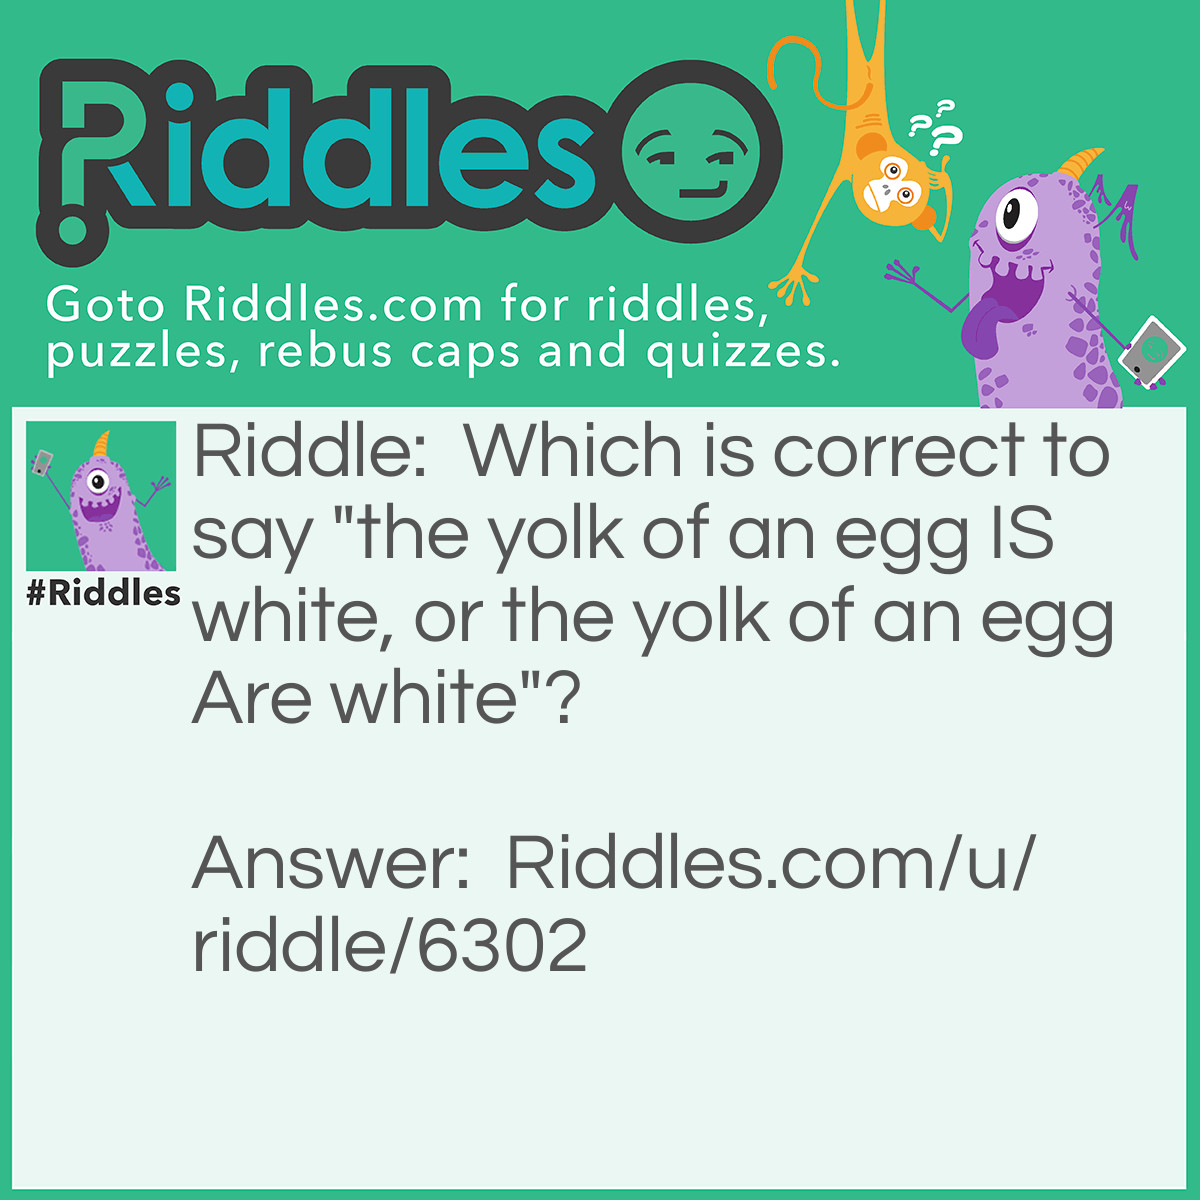 Riddle: Which is correct to say "the yolk of an egg IS white, or the yolk of an egg Are white"? Answer: The yolk of an egg is yellow.